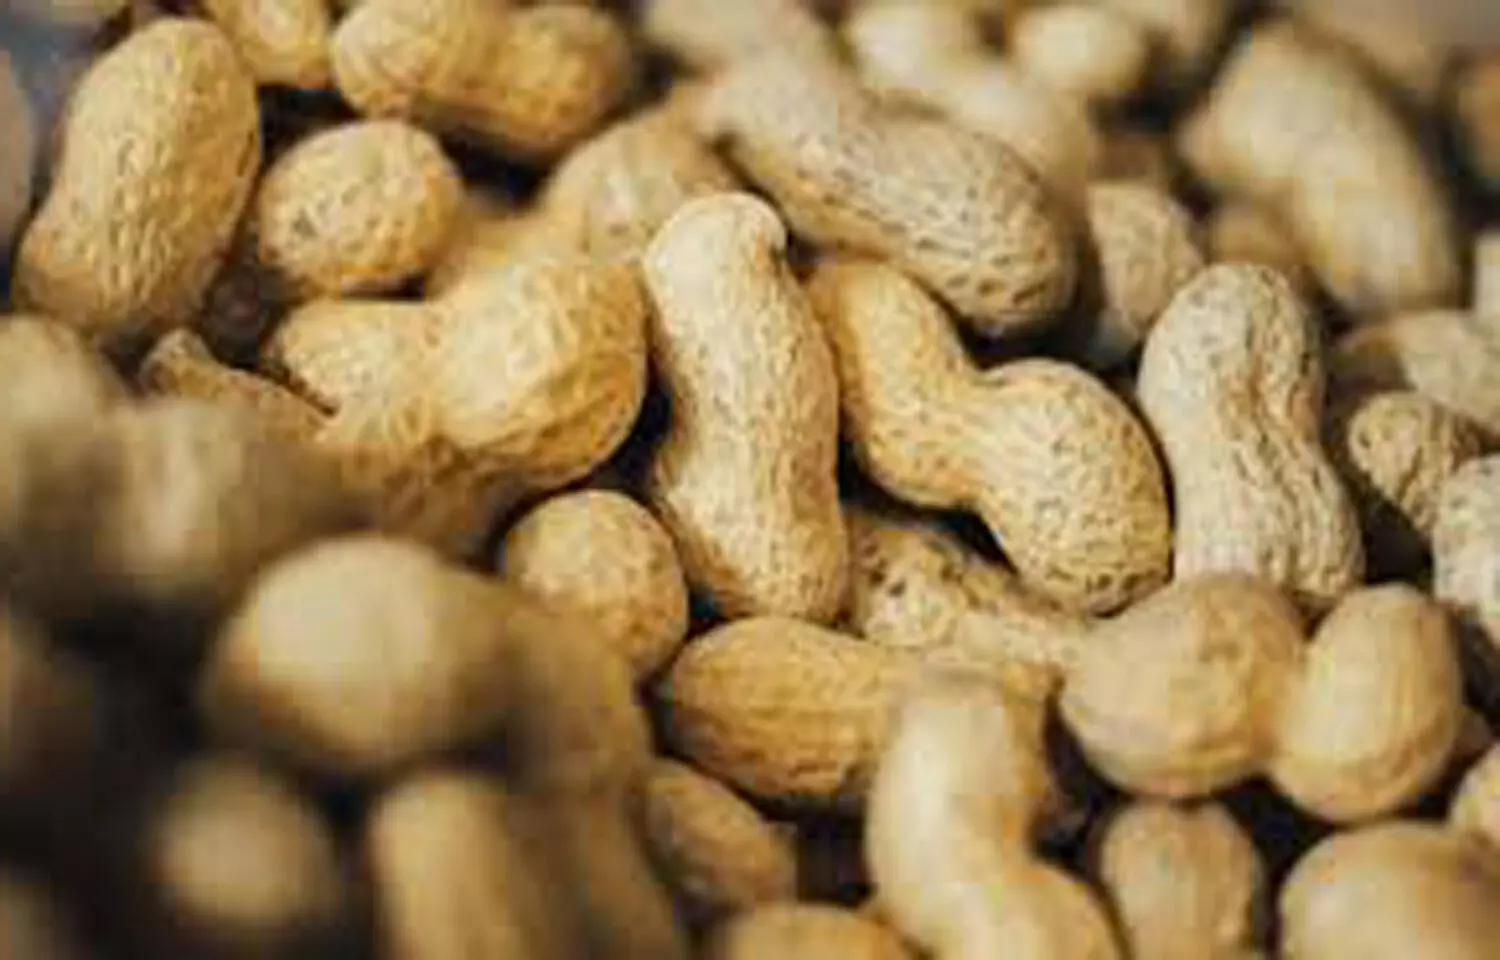 Peanut treatment lowers risk of severe allergic reactions in preschoolers